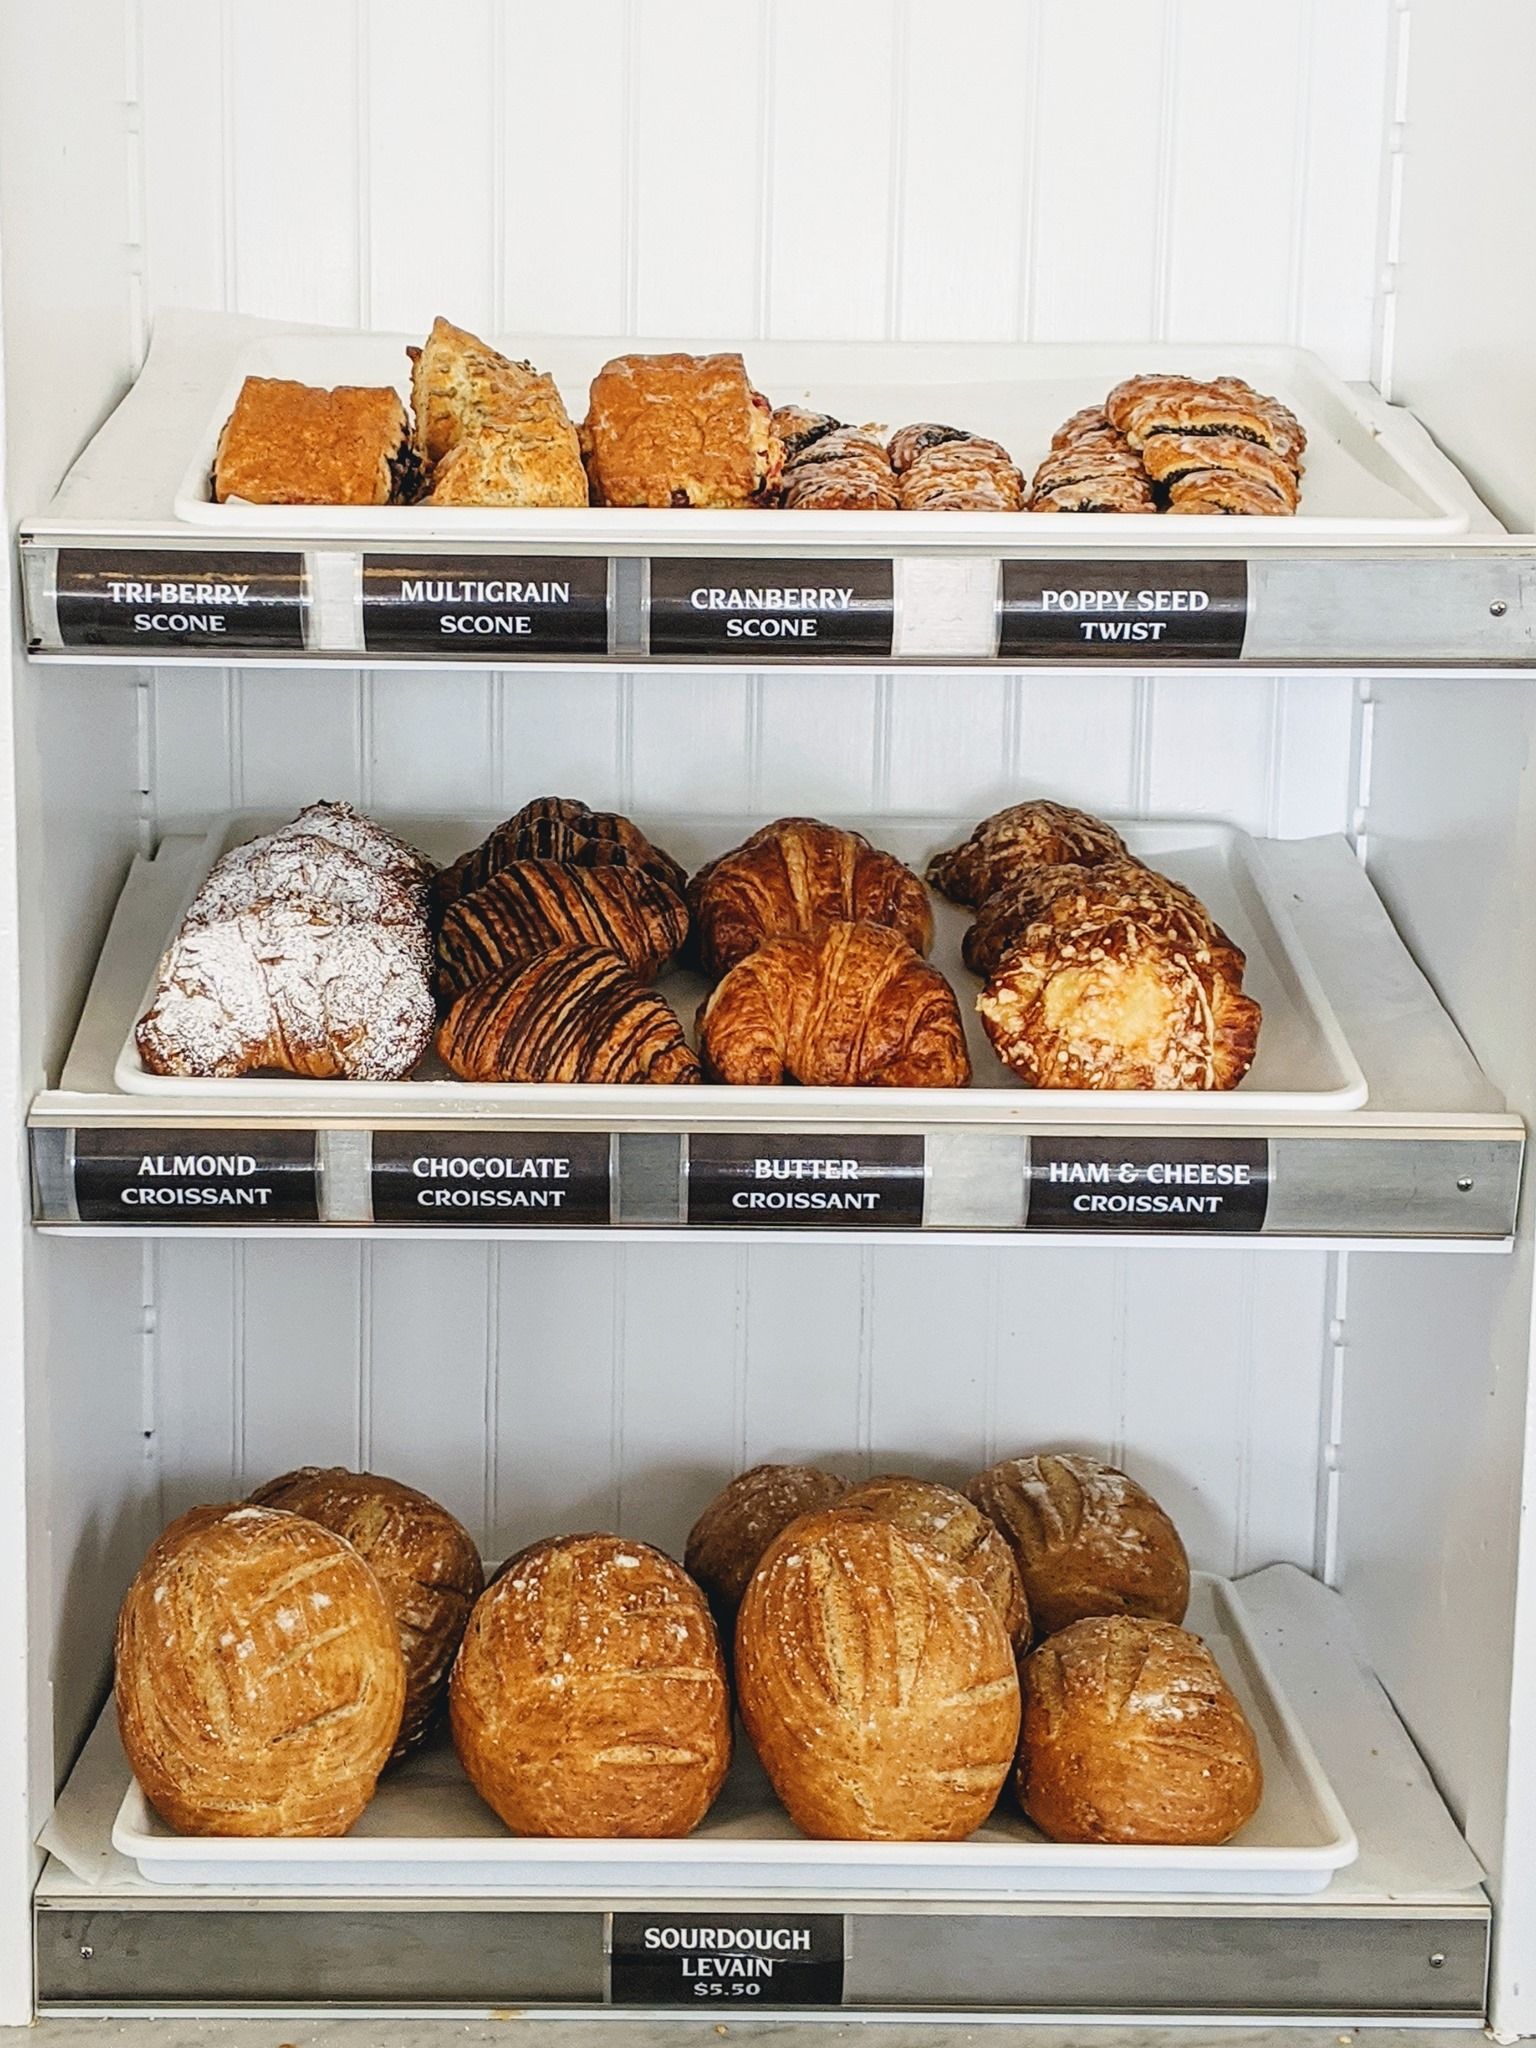 Display trays of fresh baked goods, including croissants and bread